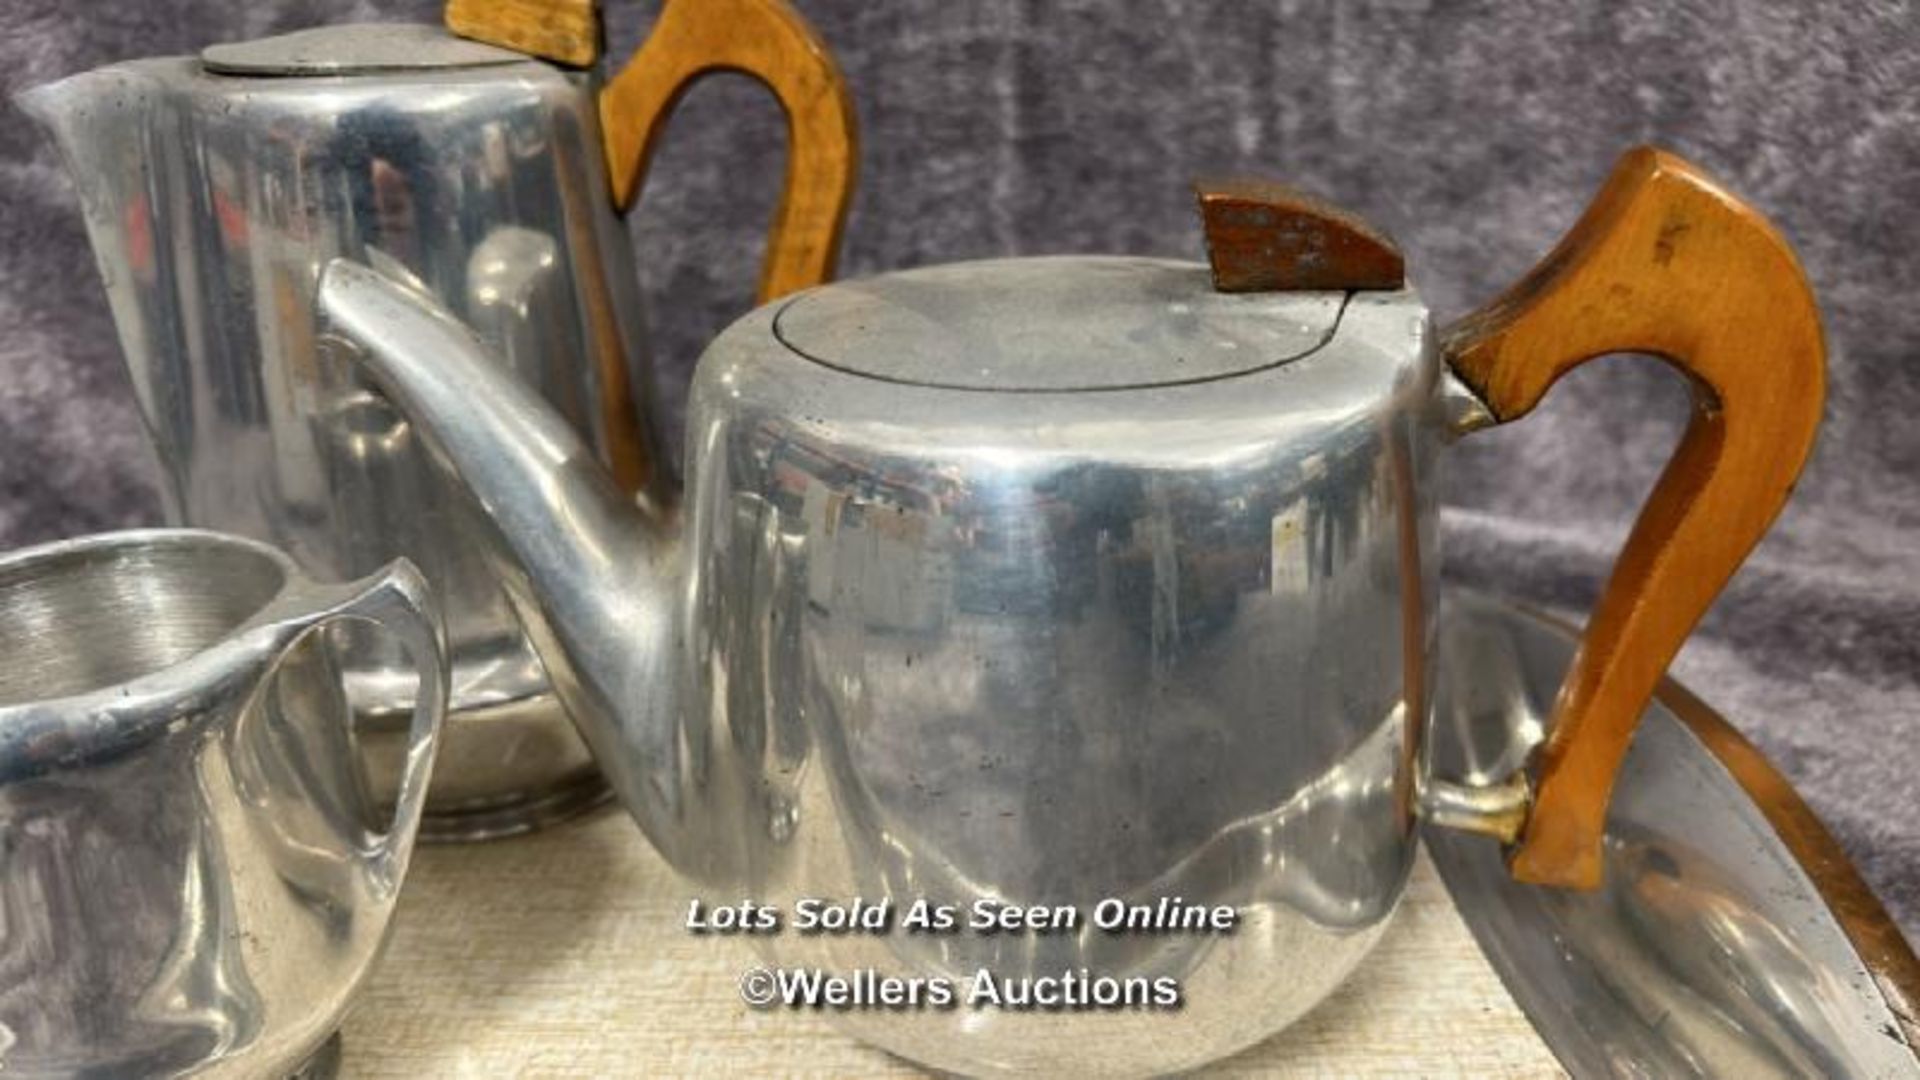 A four piece Picquot Ware part tea and coffee service including coffee pot, tea pot, milk jug and - Image 2 of 7